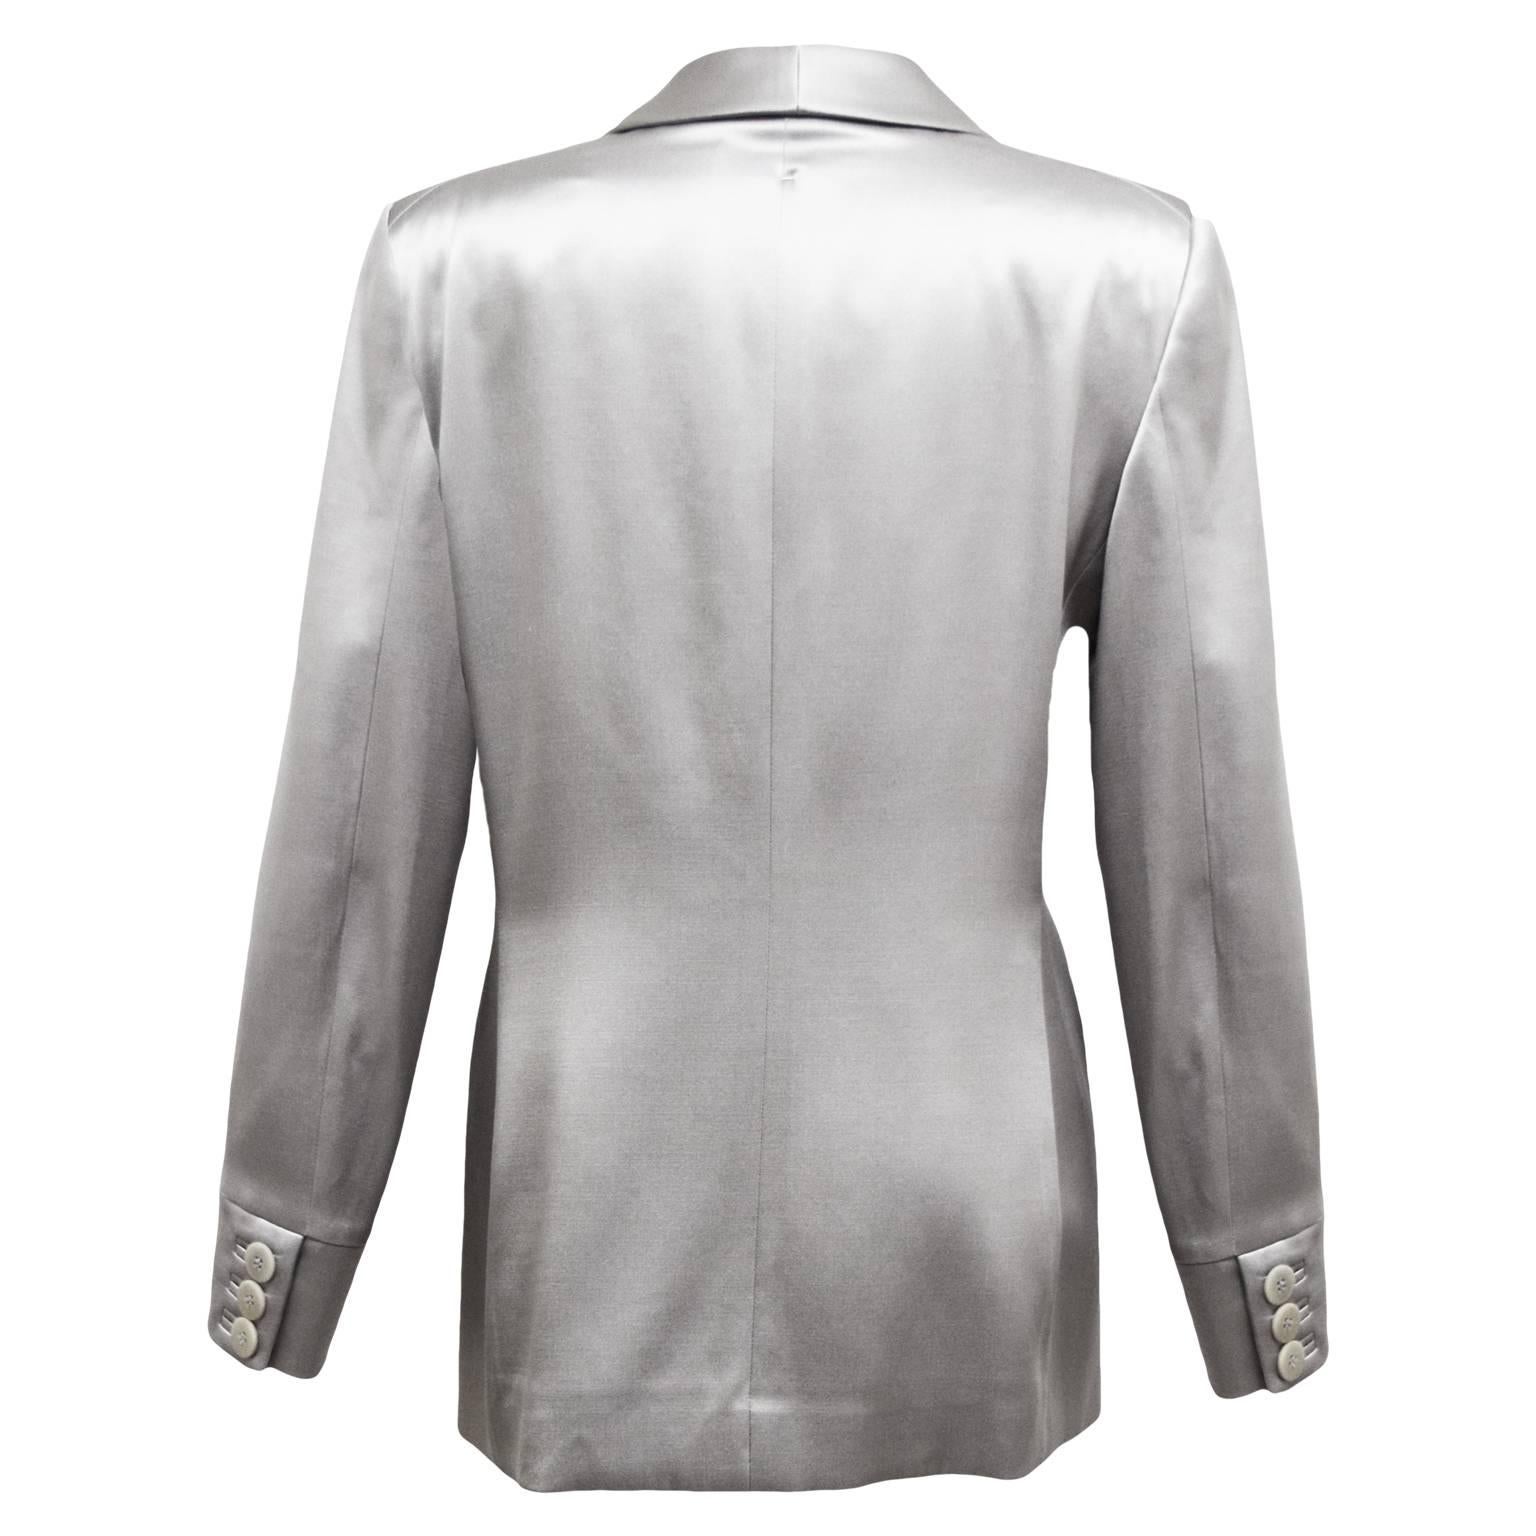 This Giorgio Armani tuxedo blazer is made out of 100% grey metallic silk and is single breasted, with pockets, and is fully lined.